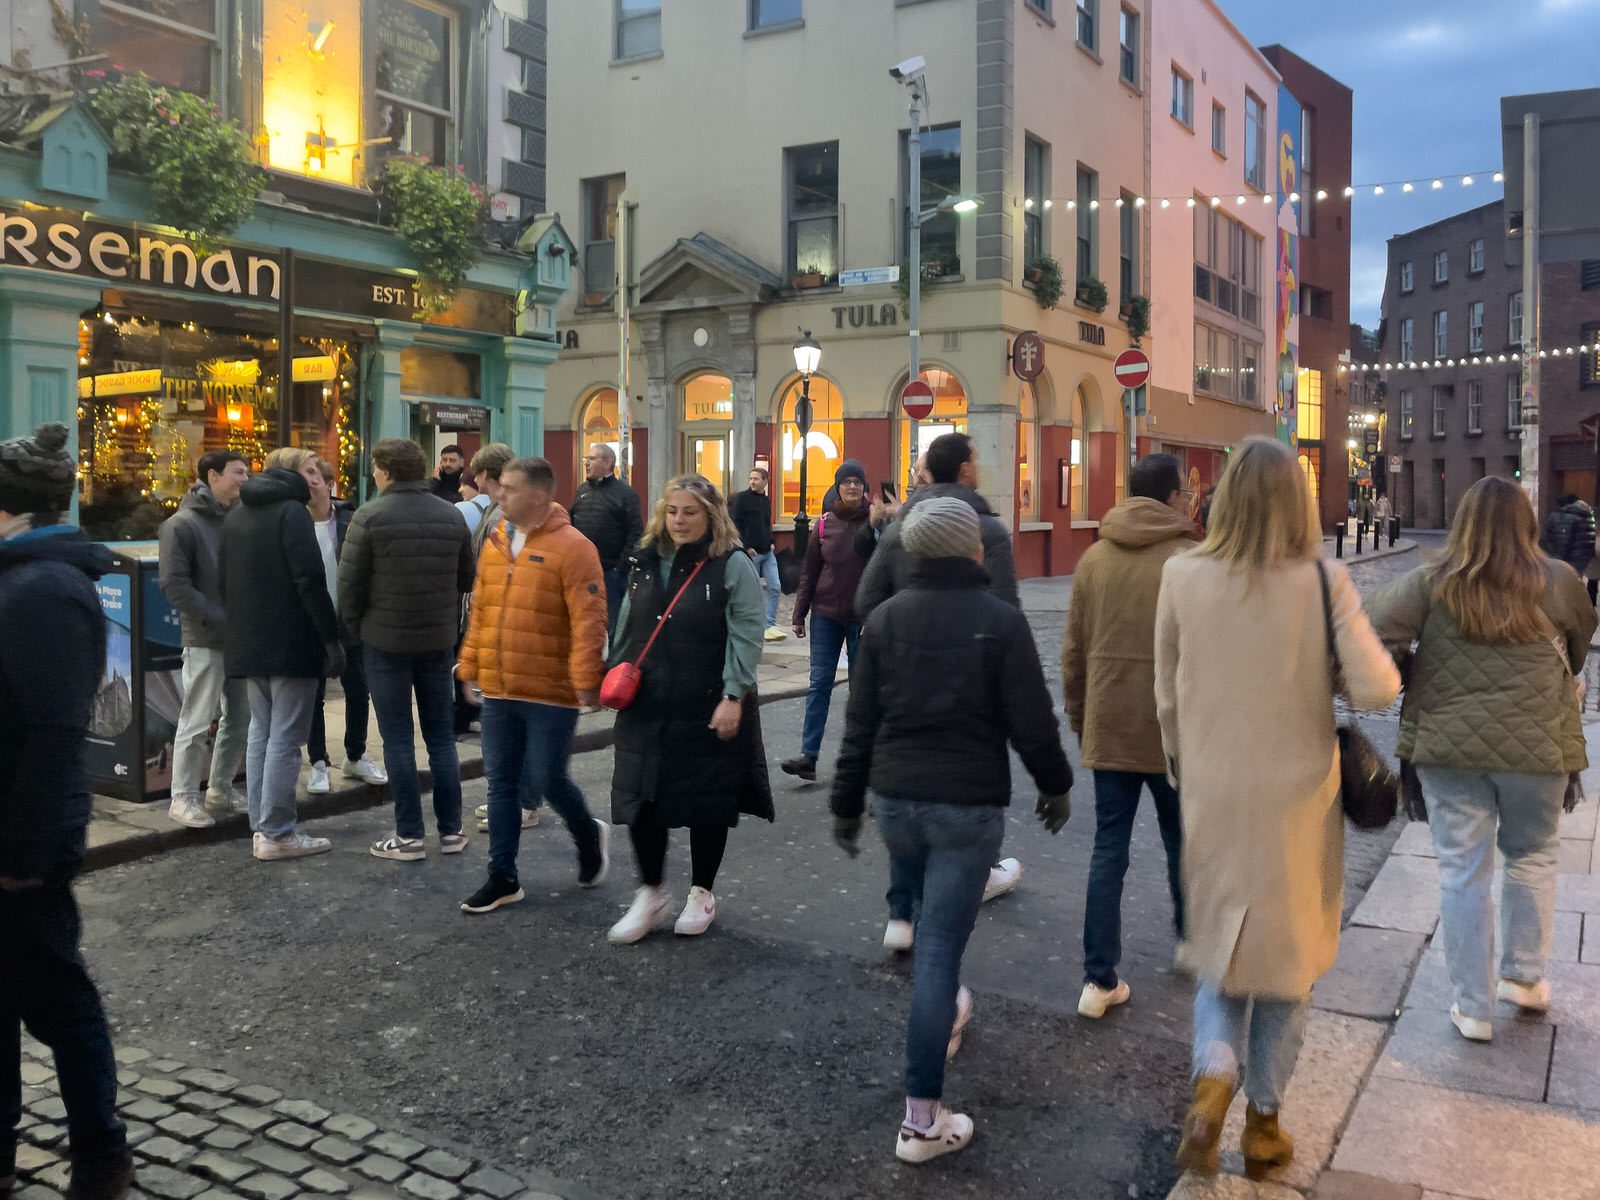 I VISITED TEMPLE BAR TODAY [AS NIGHTFALL WAS APPROACHING]-225360-1